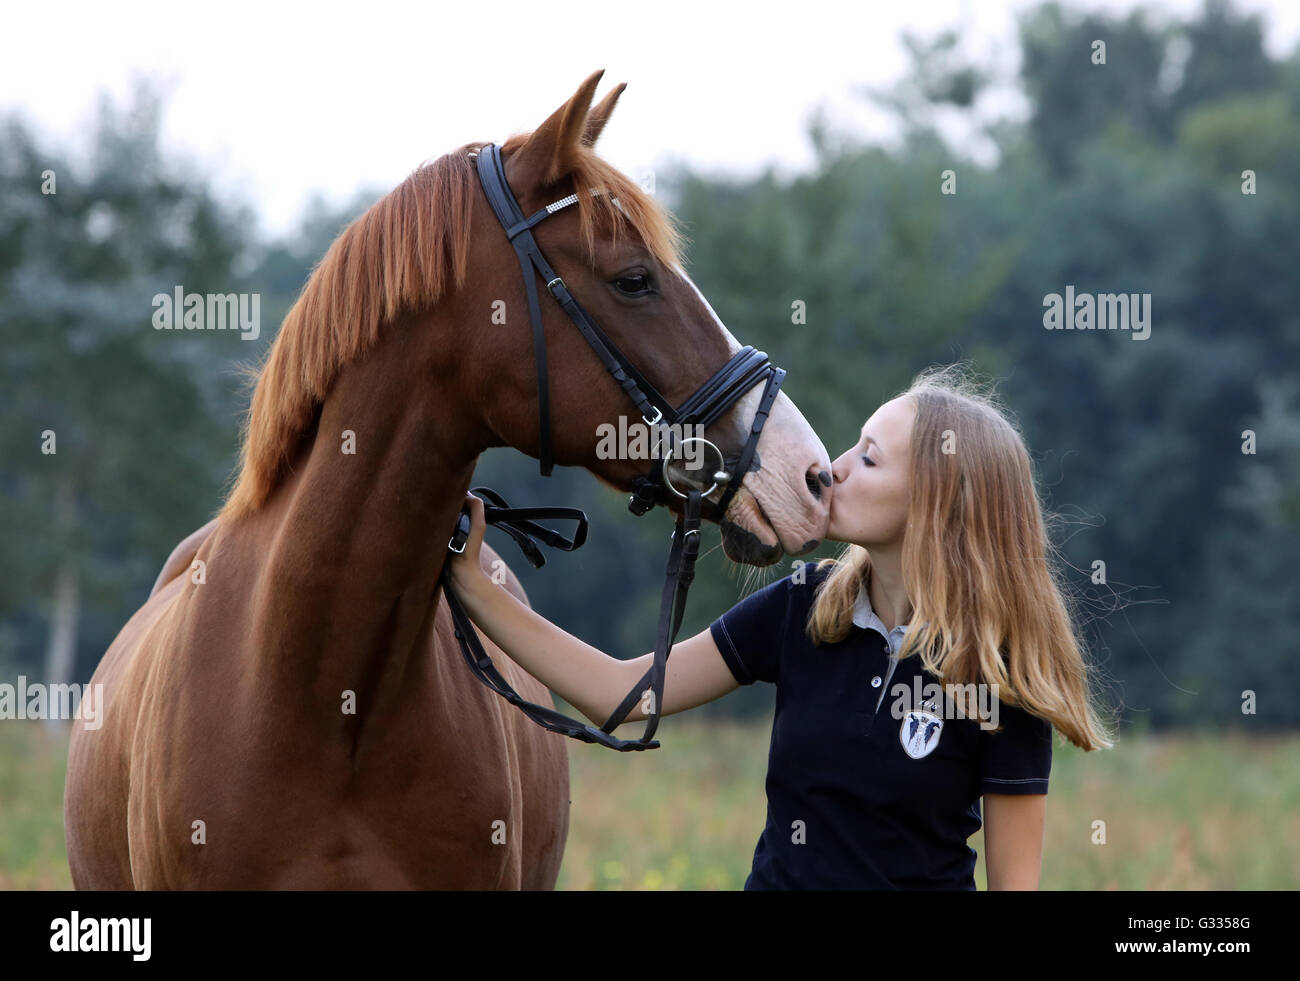 Brieselang, Germany, girl kisses her horse on the nostrils Stock Photo